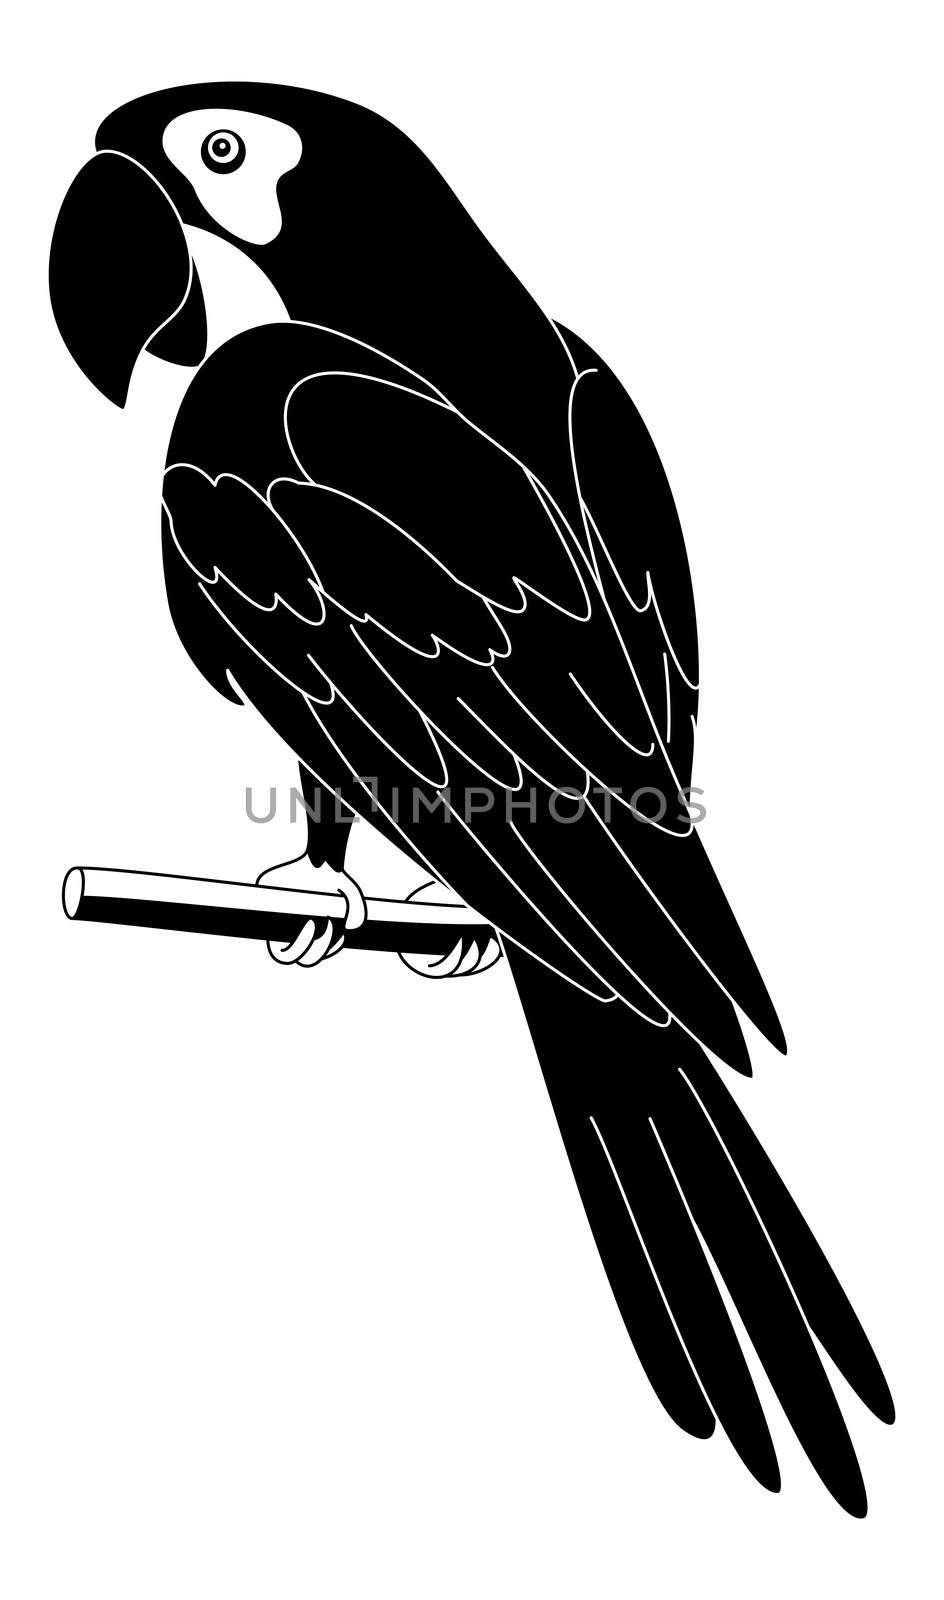 Clever speaking parrot sits on a wooden pole, black silhouette on white background.